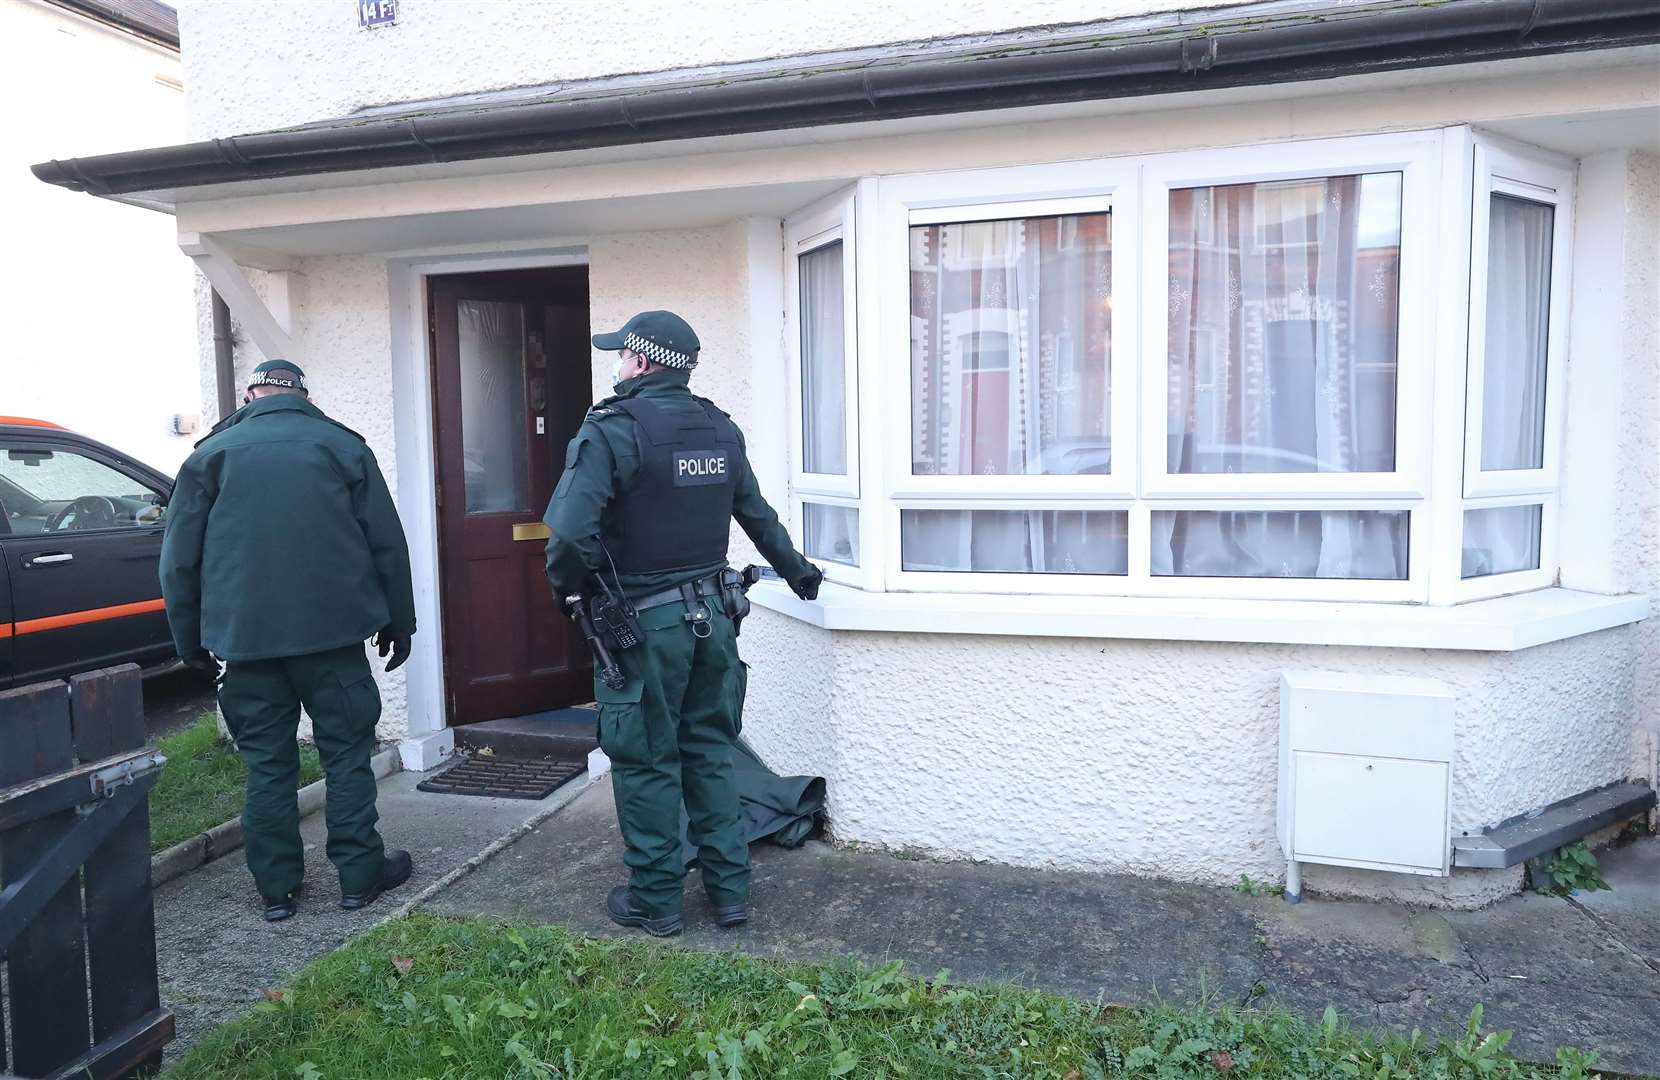 Police search a property in south Belfast in connection with the bombings investigation (Niall Carson/PA)